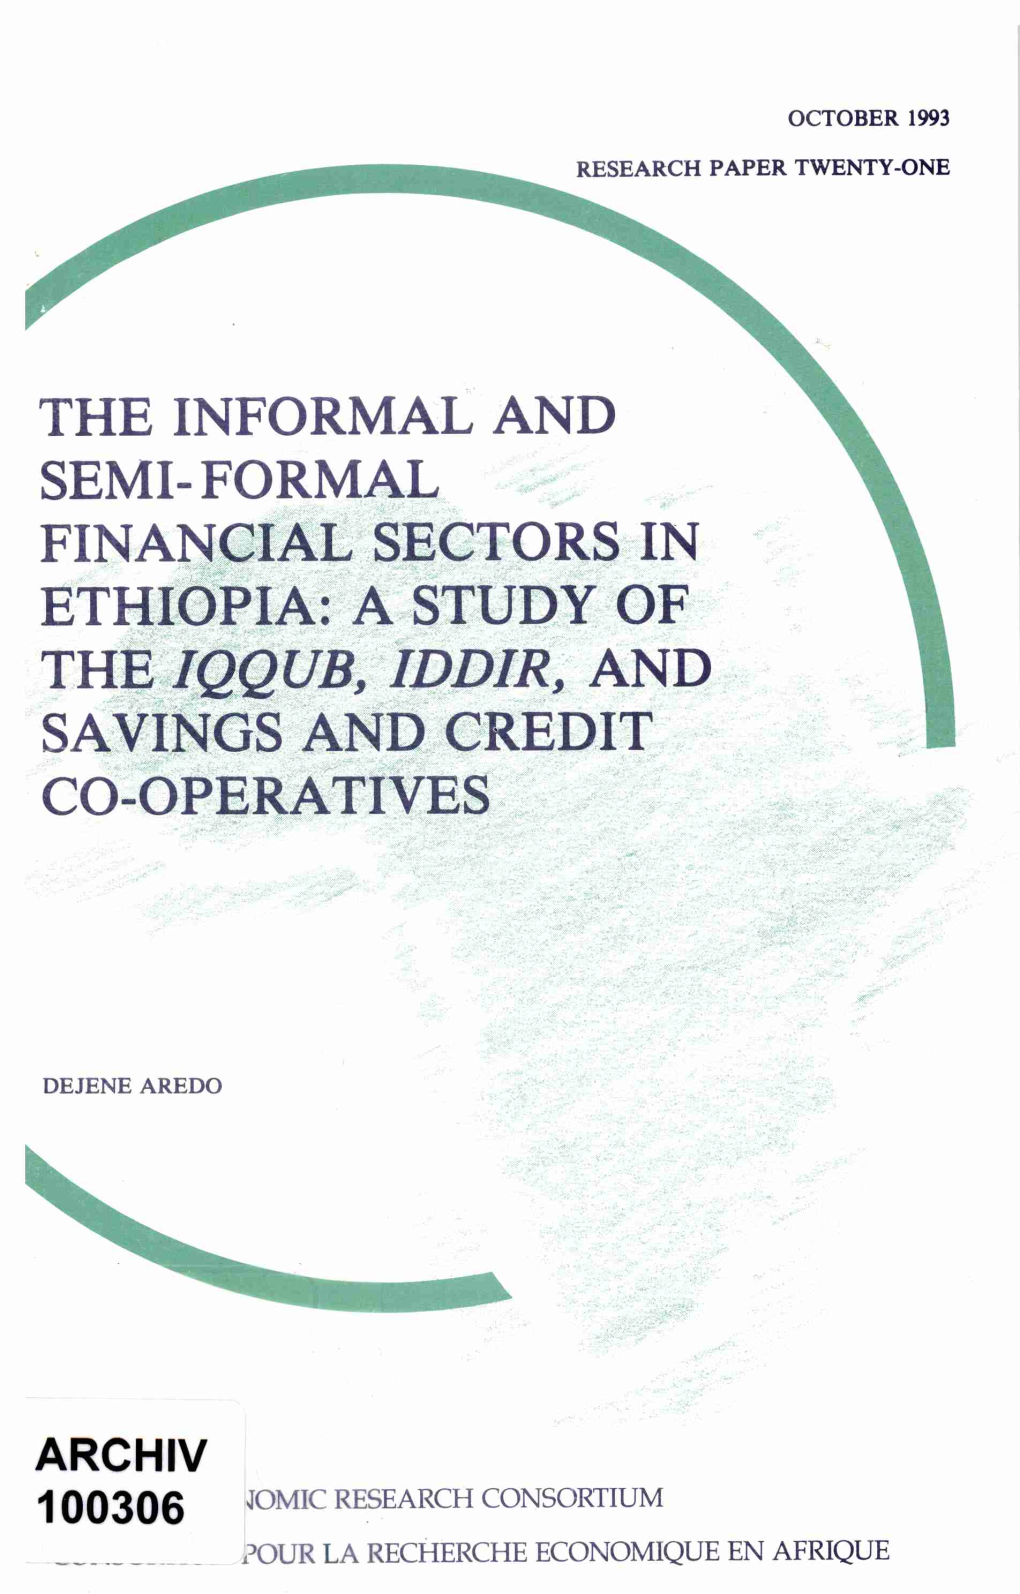 The Informal and Semi-Formal Financial Sectors in Ethiopia: a Study of the Iqqub, Iddir and Savings and Credit Co-Operatives